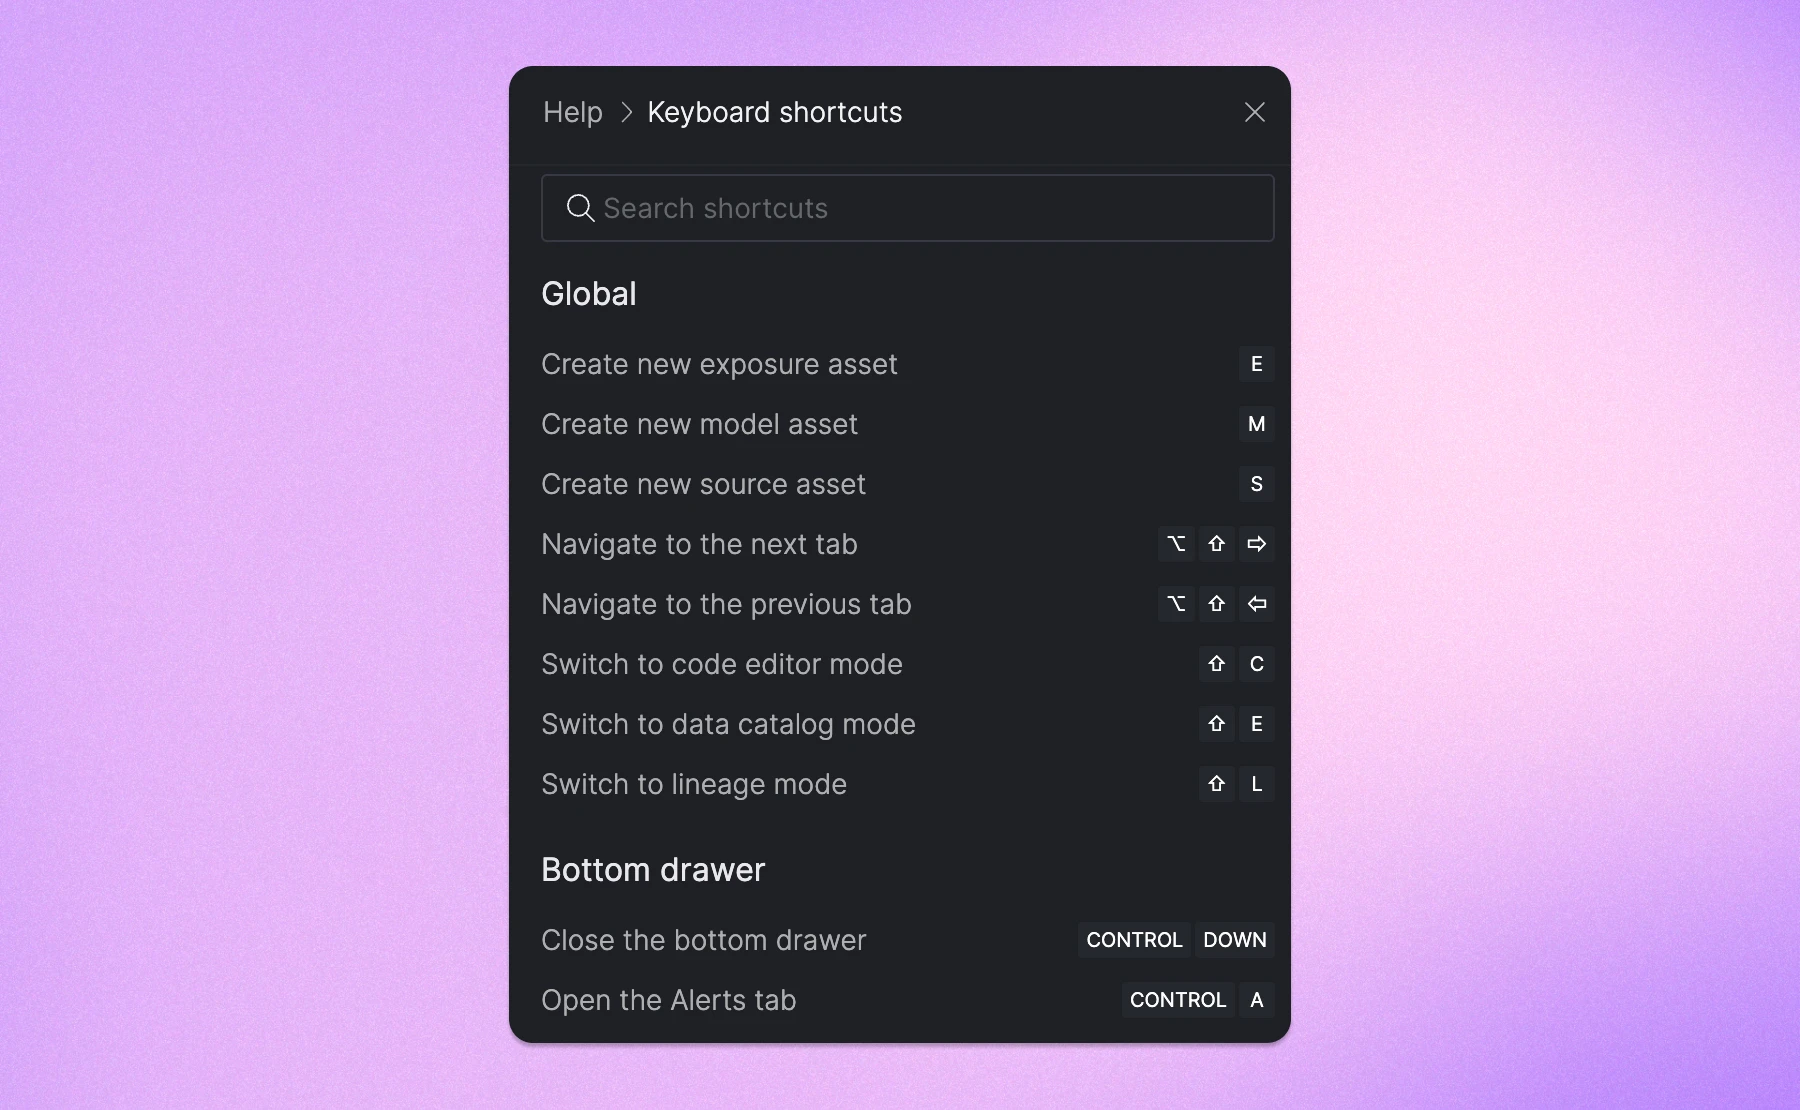 Keyboard shortcuts in the help drawer